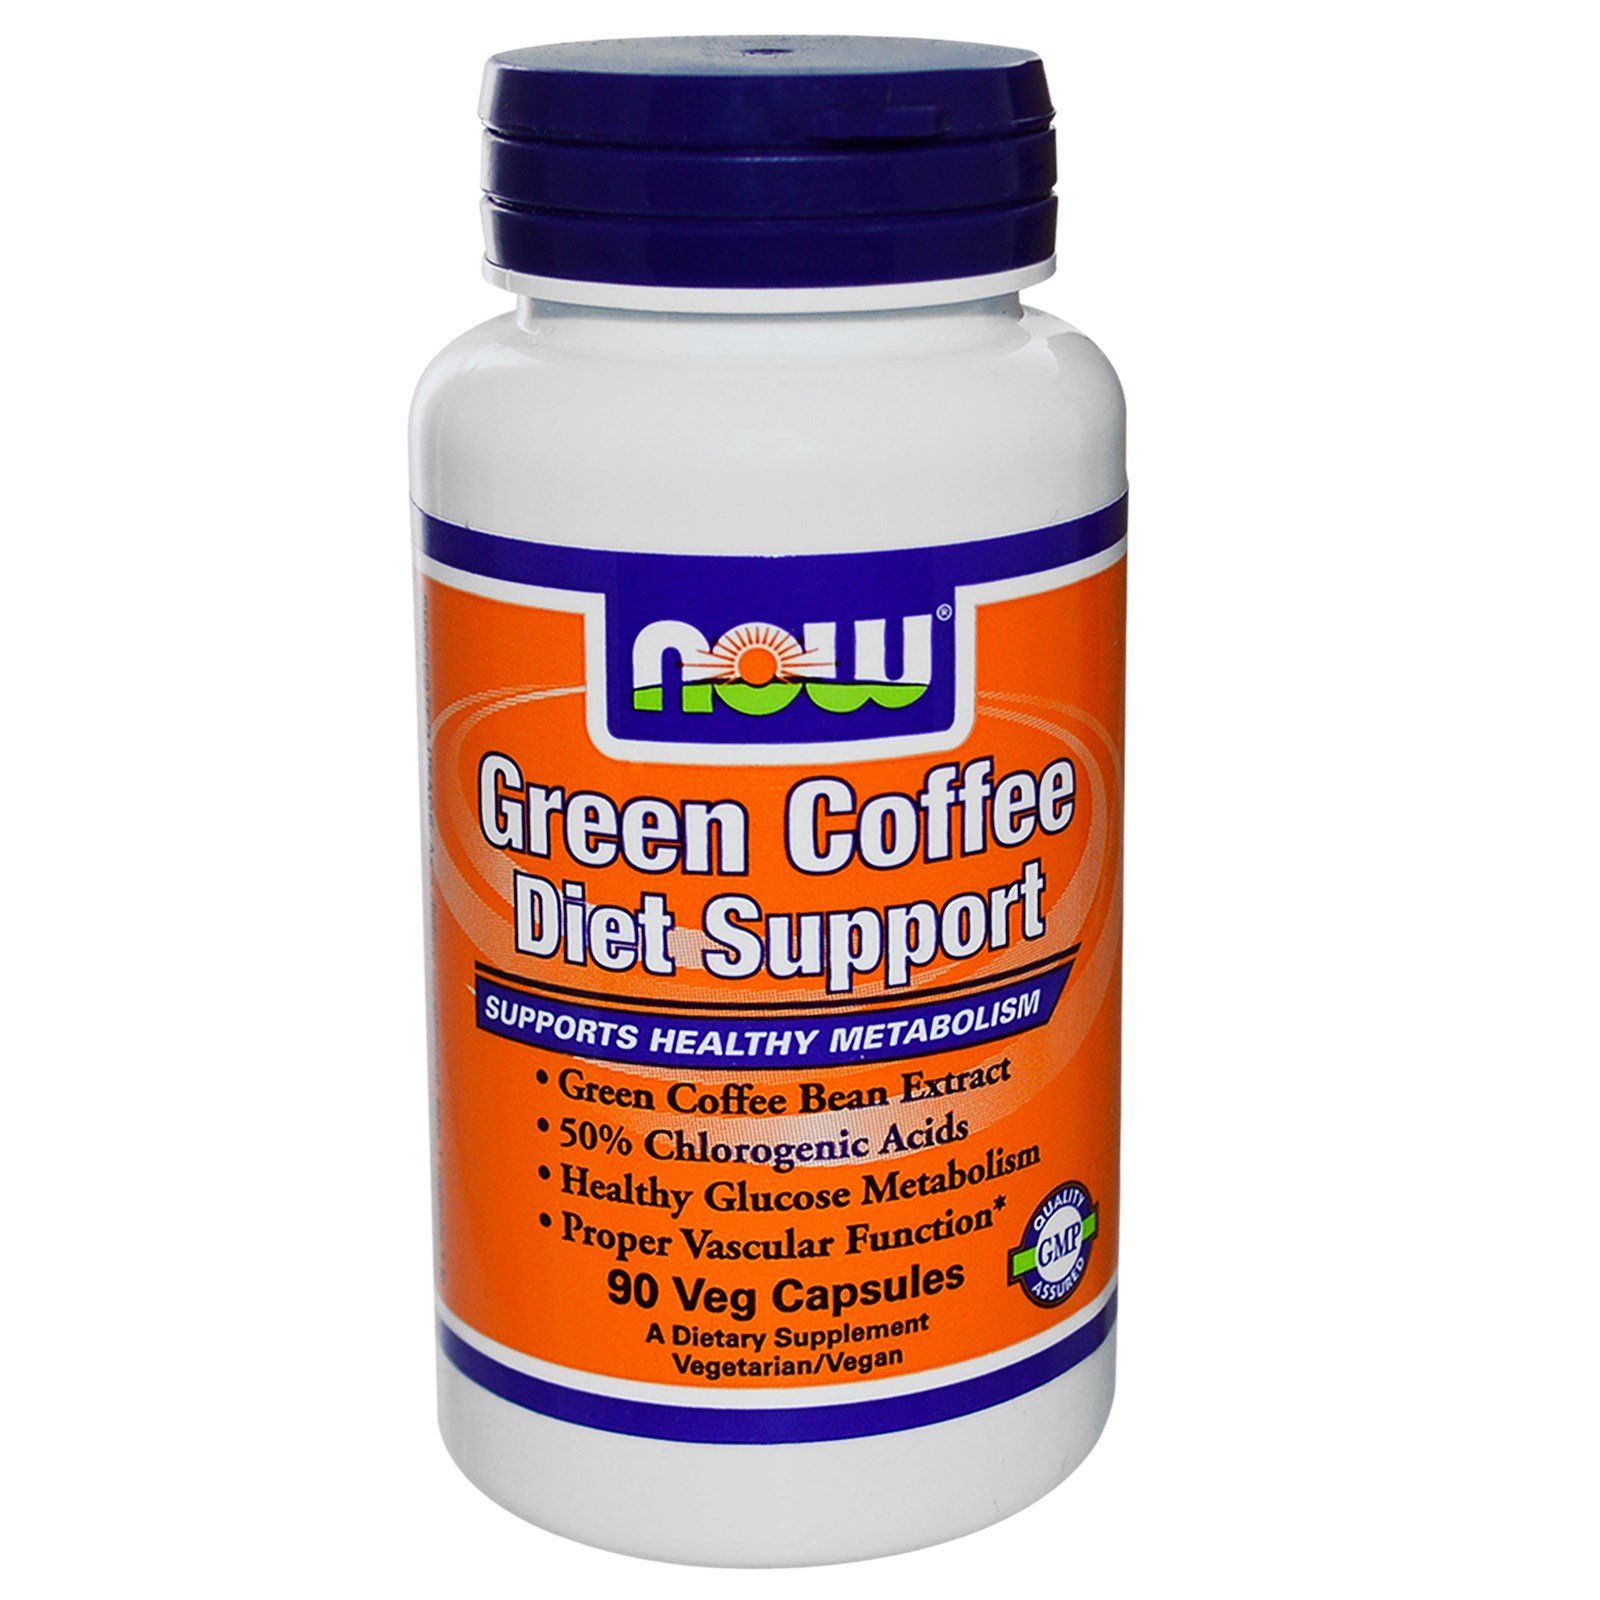 Green Coffee Diet Support, 90 pcs, Now. Thermogenic. Weight Loss Fat burning 